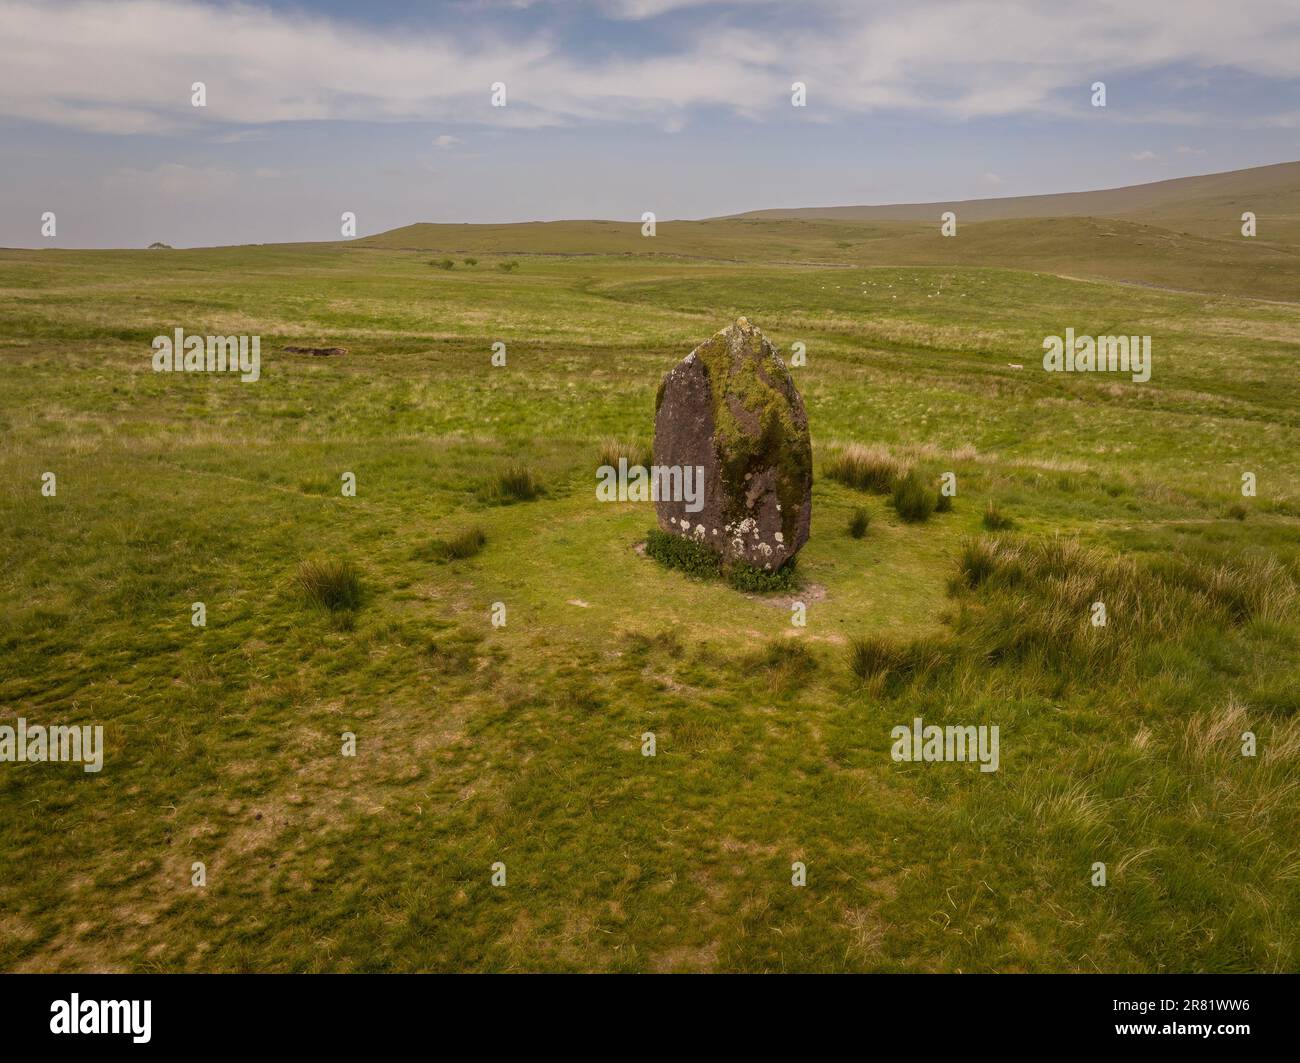 The ancient standing stone called Maen Llia off the Brecon Beacons road from Heol Senni and Ystradfellte near the Devil's Elbow, South Wales UK Stock Photo